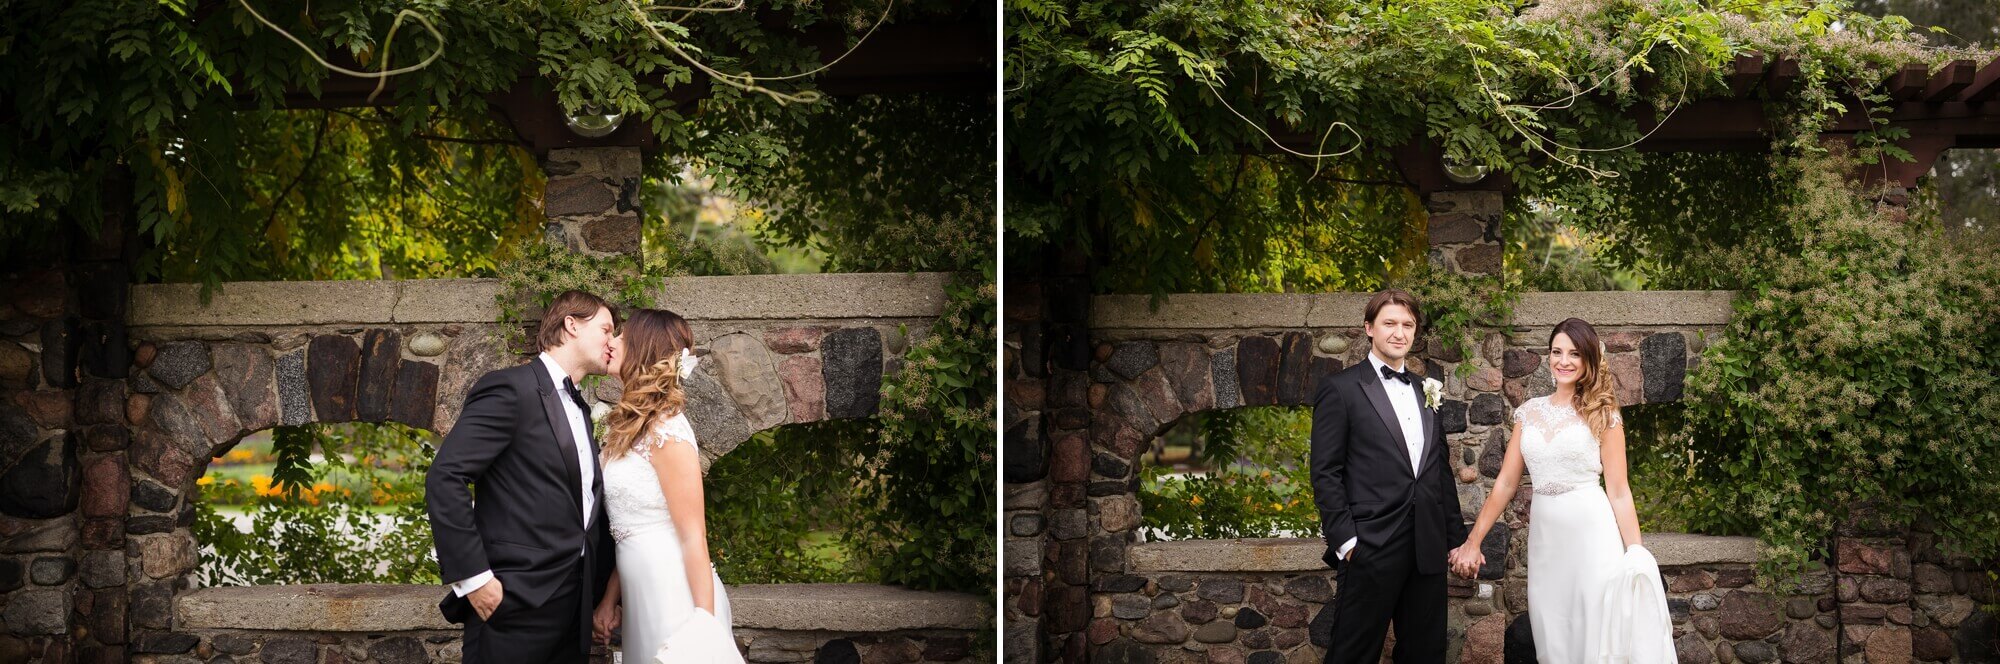 Outdoor portraits of the bride and groom in front of a stone wall at Bosnian Islamic Associations Gazi Husrev Beg, Toronto